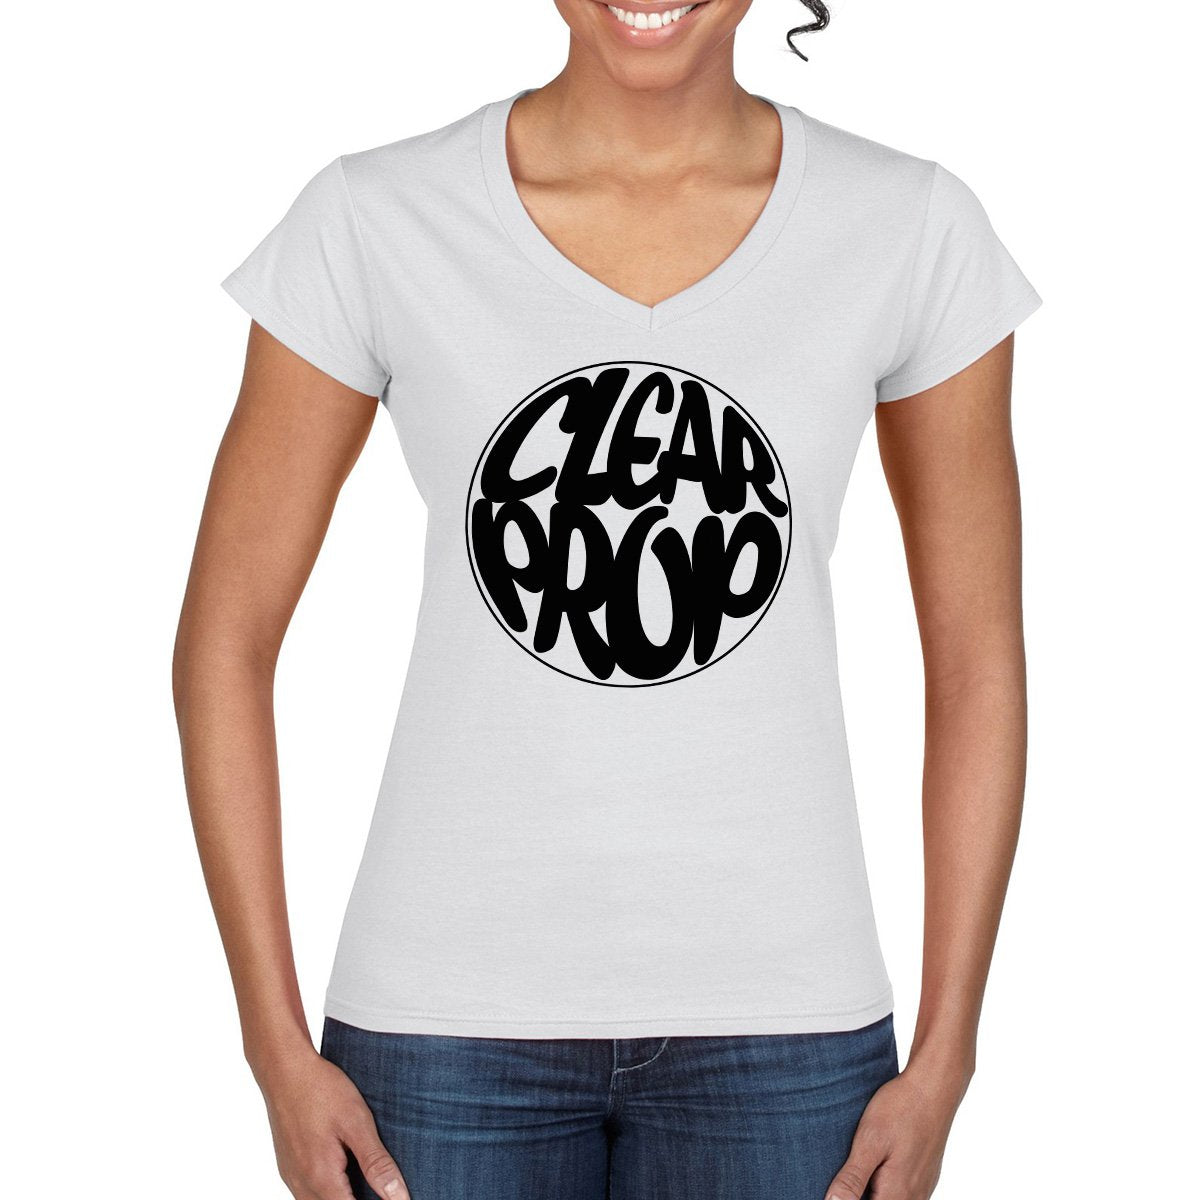 CLEAR PROP Semi-Fitted Women's V-Neck T-Shirt